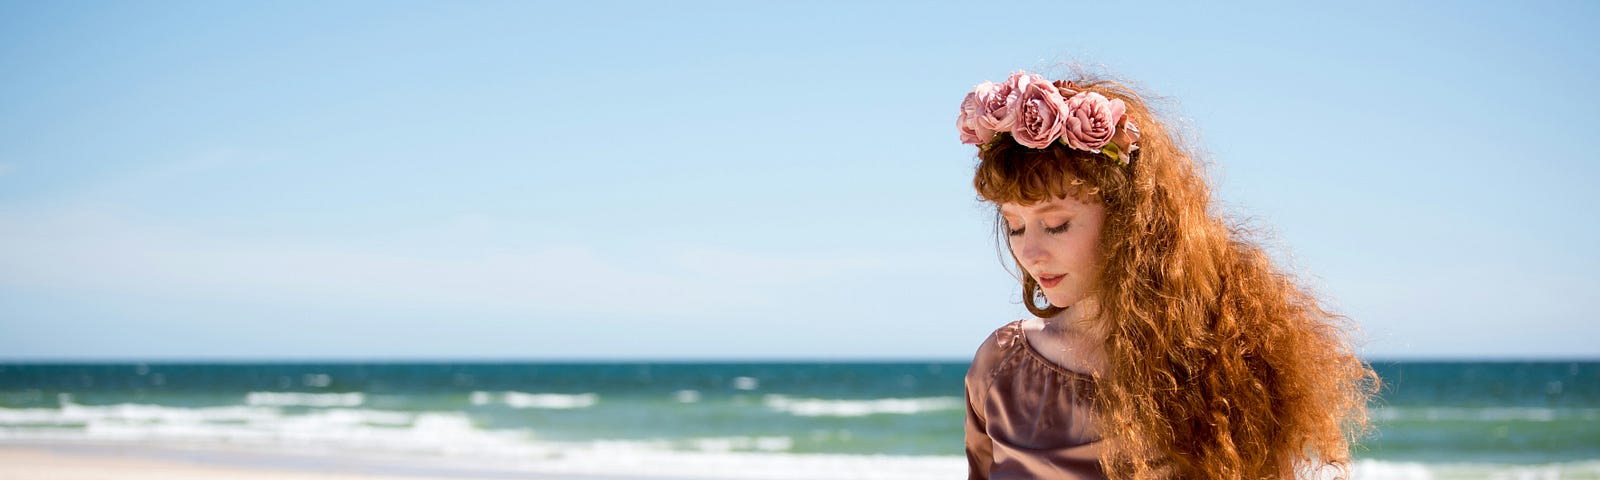 a woman with roses in her hair standing in front of an ocean on a beach